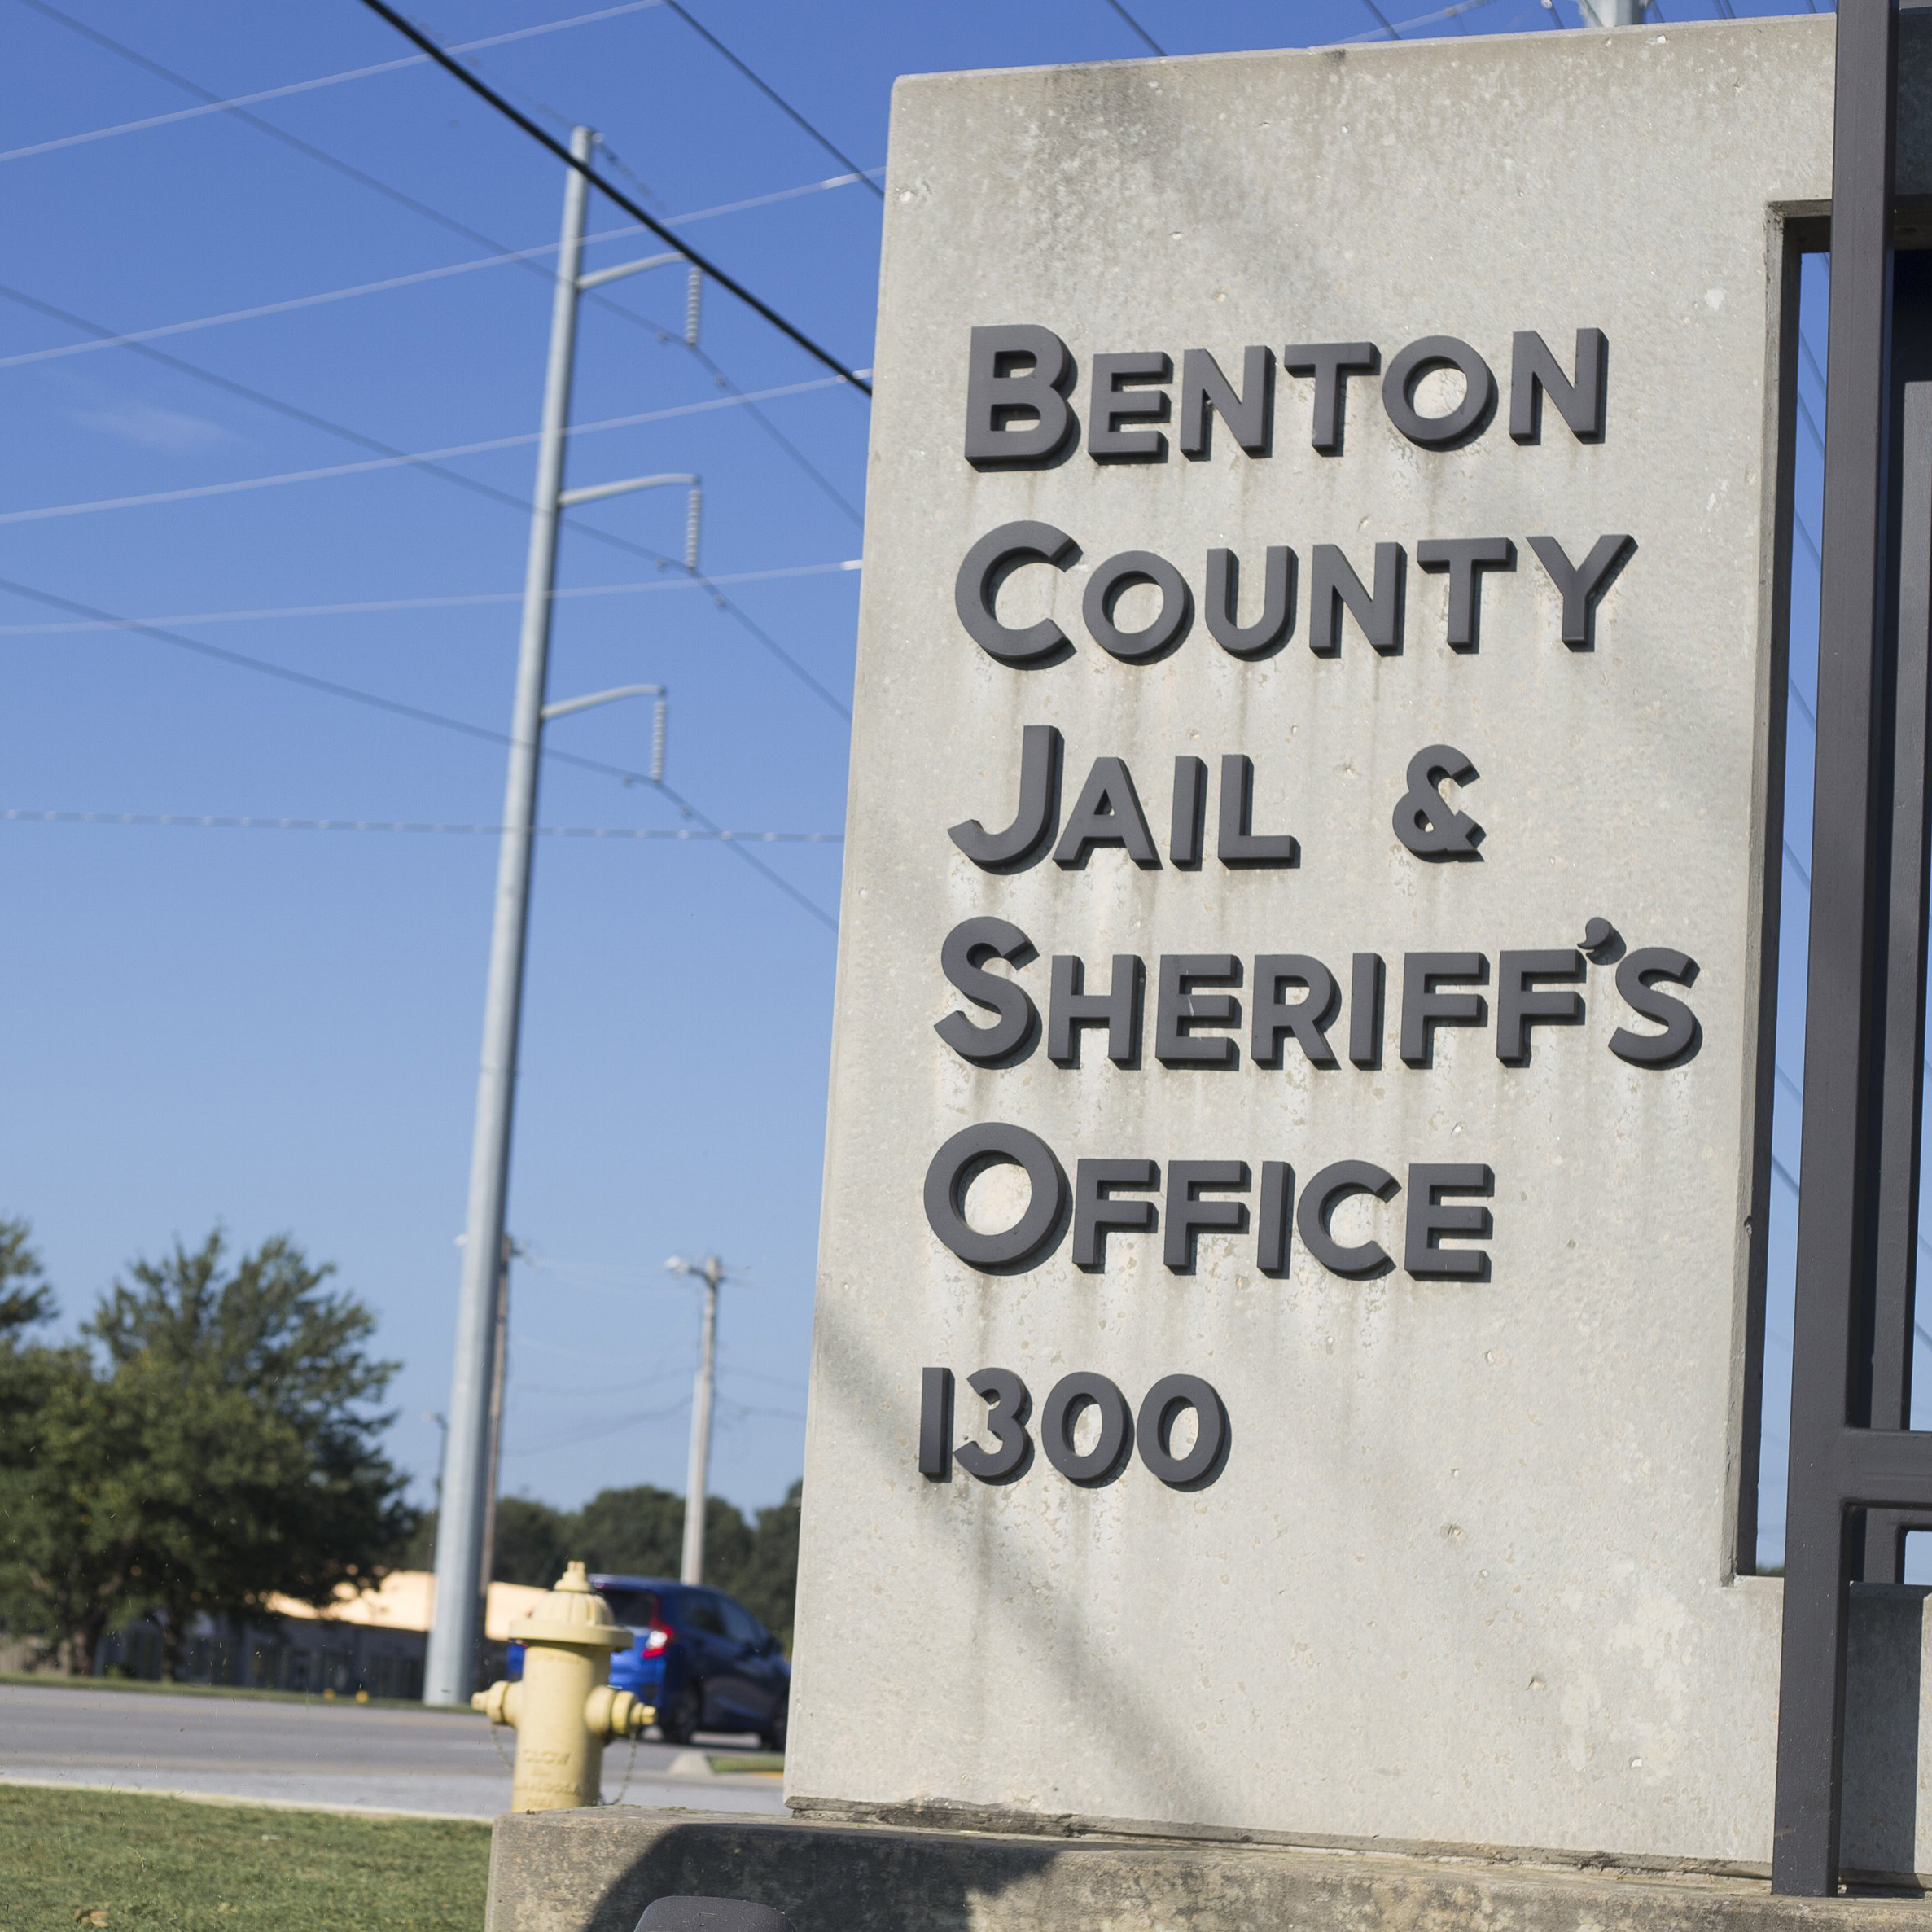 Know the News - How can we pay for a potential Benton County Jail expansion